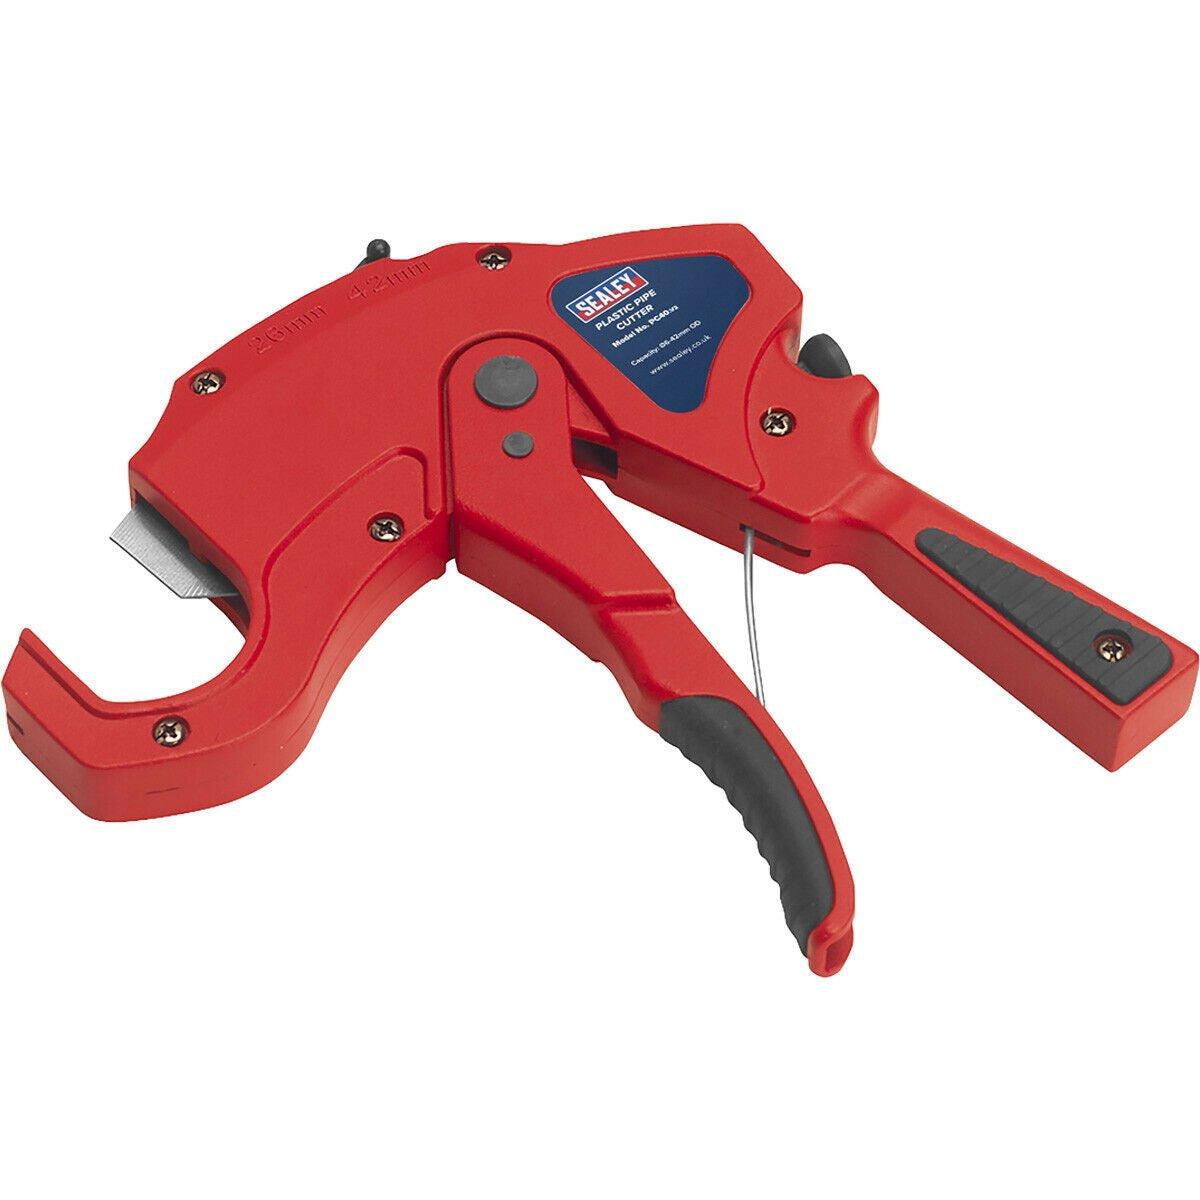 Die-Cast Plastic Pipe Cutter - 6mm to 42mm Capacity - Ratchet Cutting Action